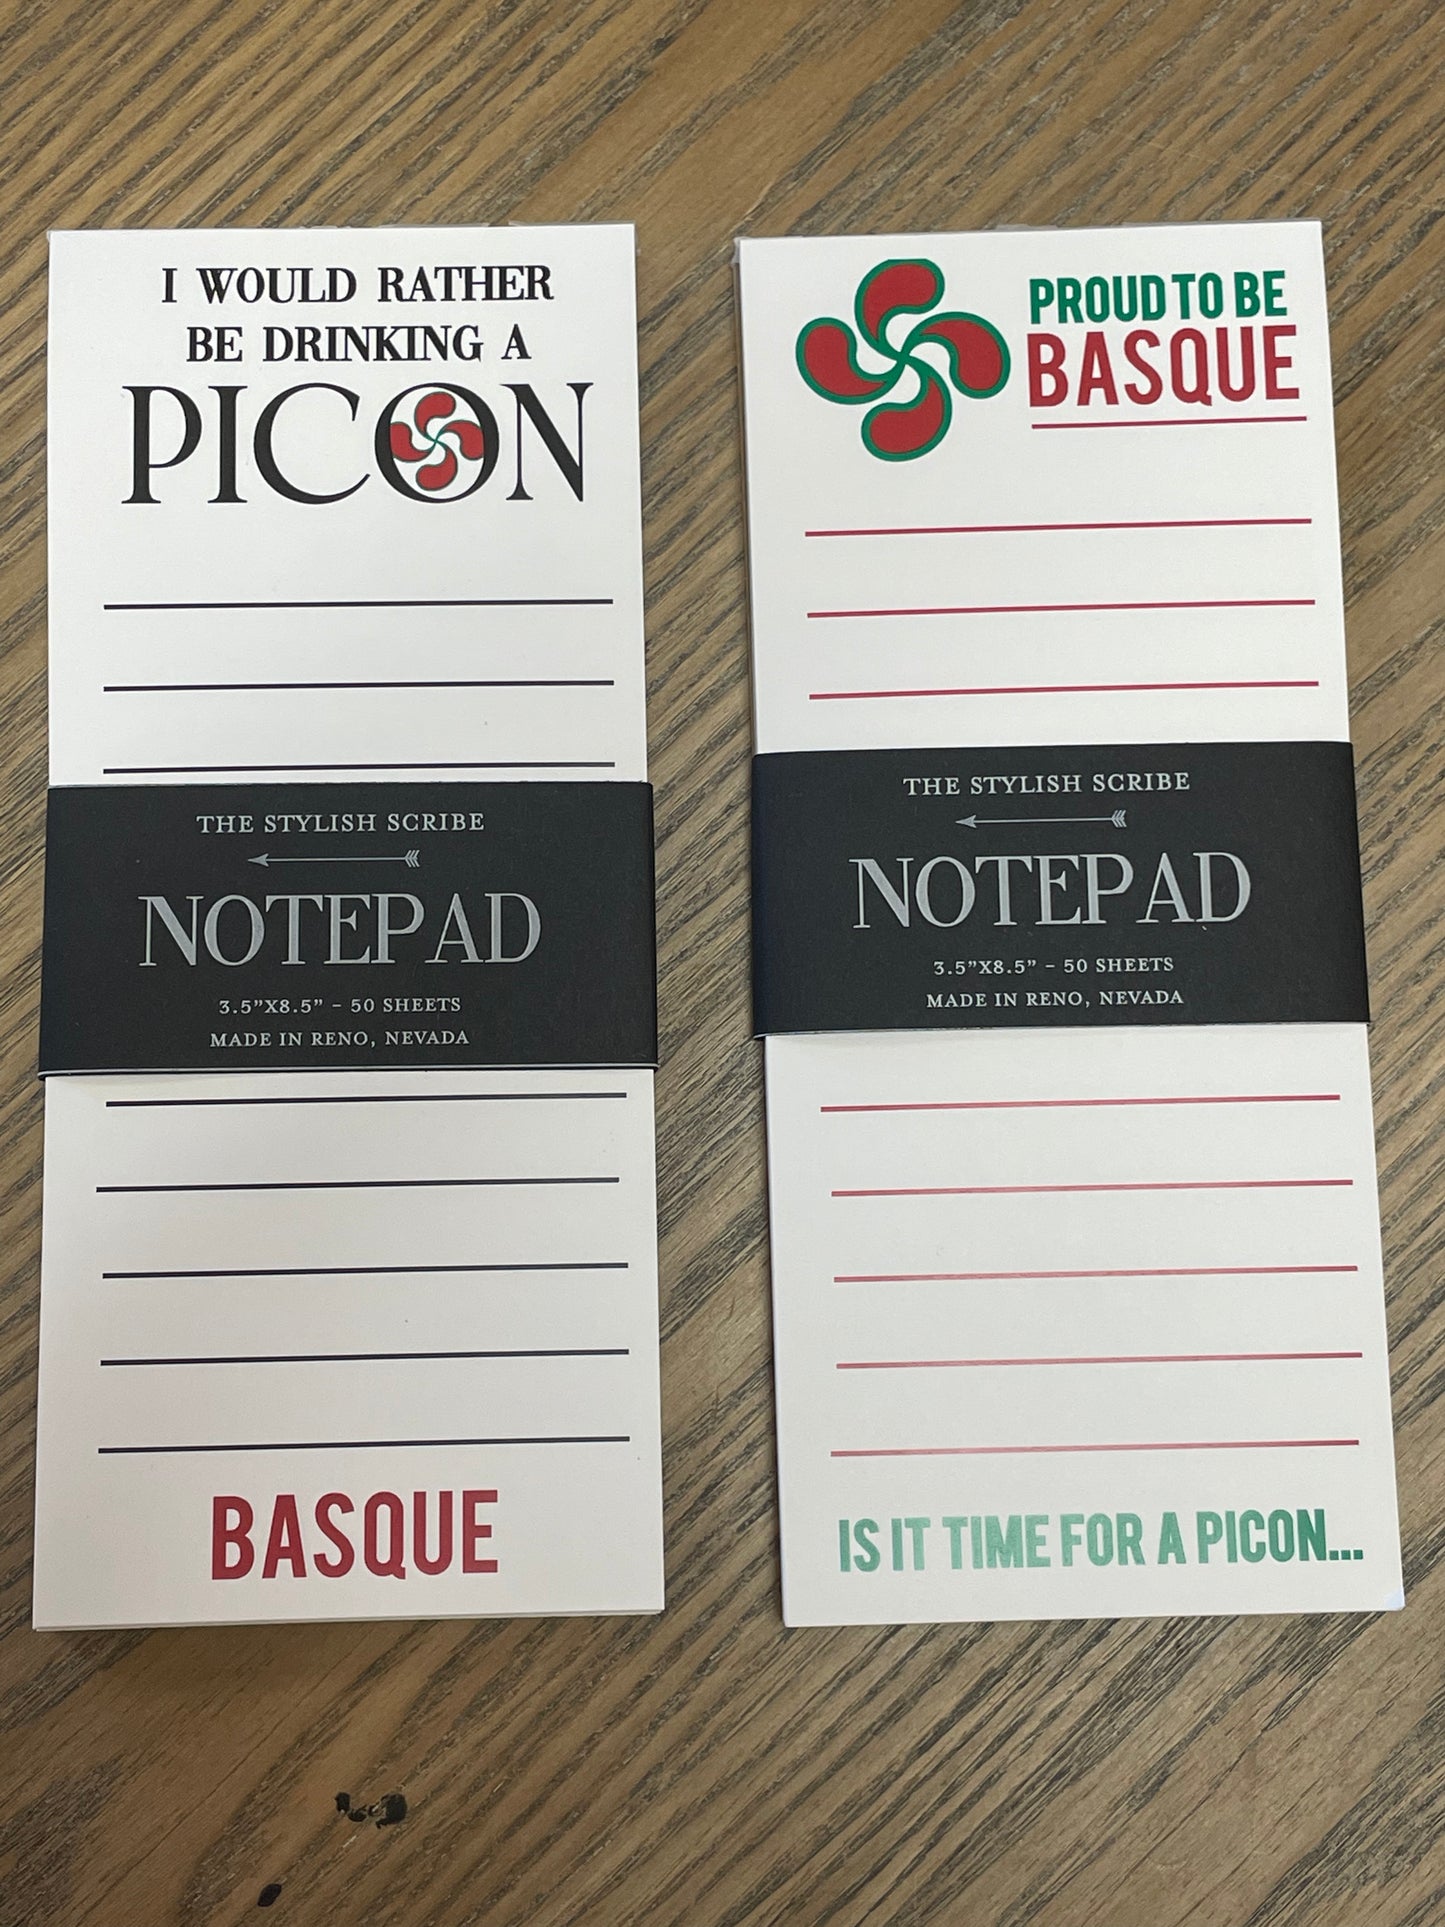 Proud to be Basque Notepad